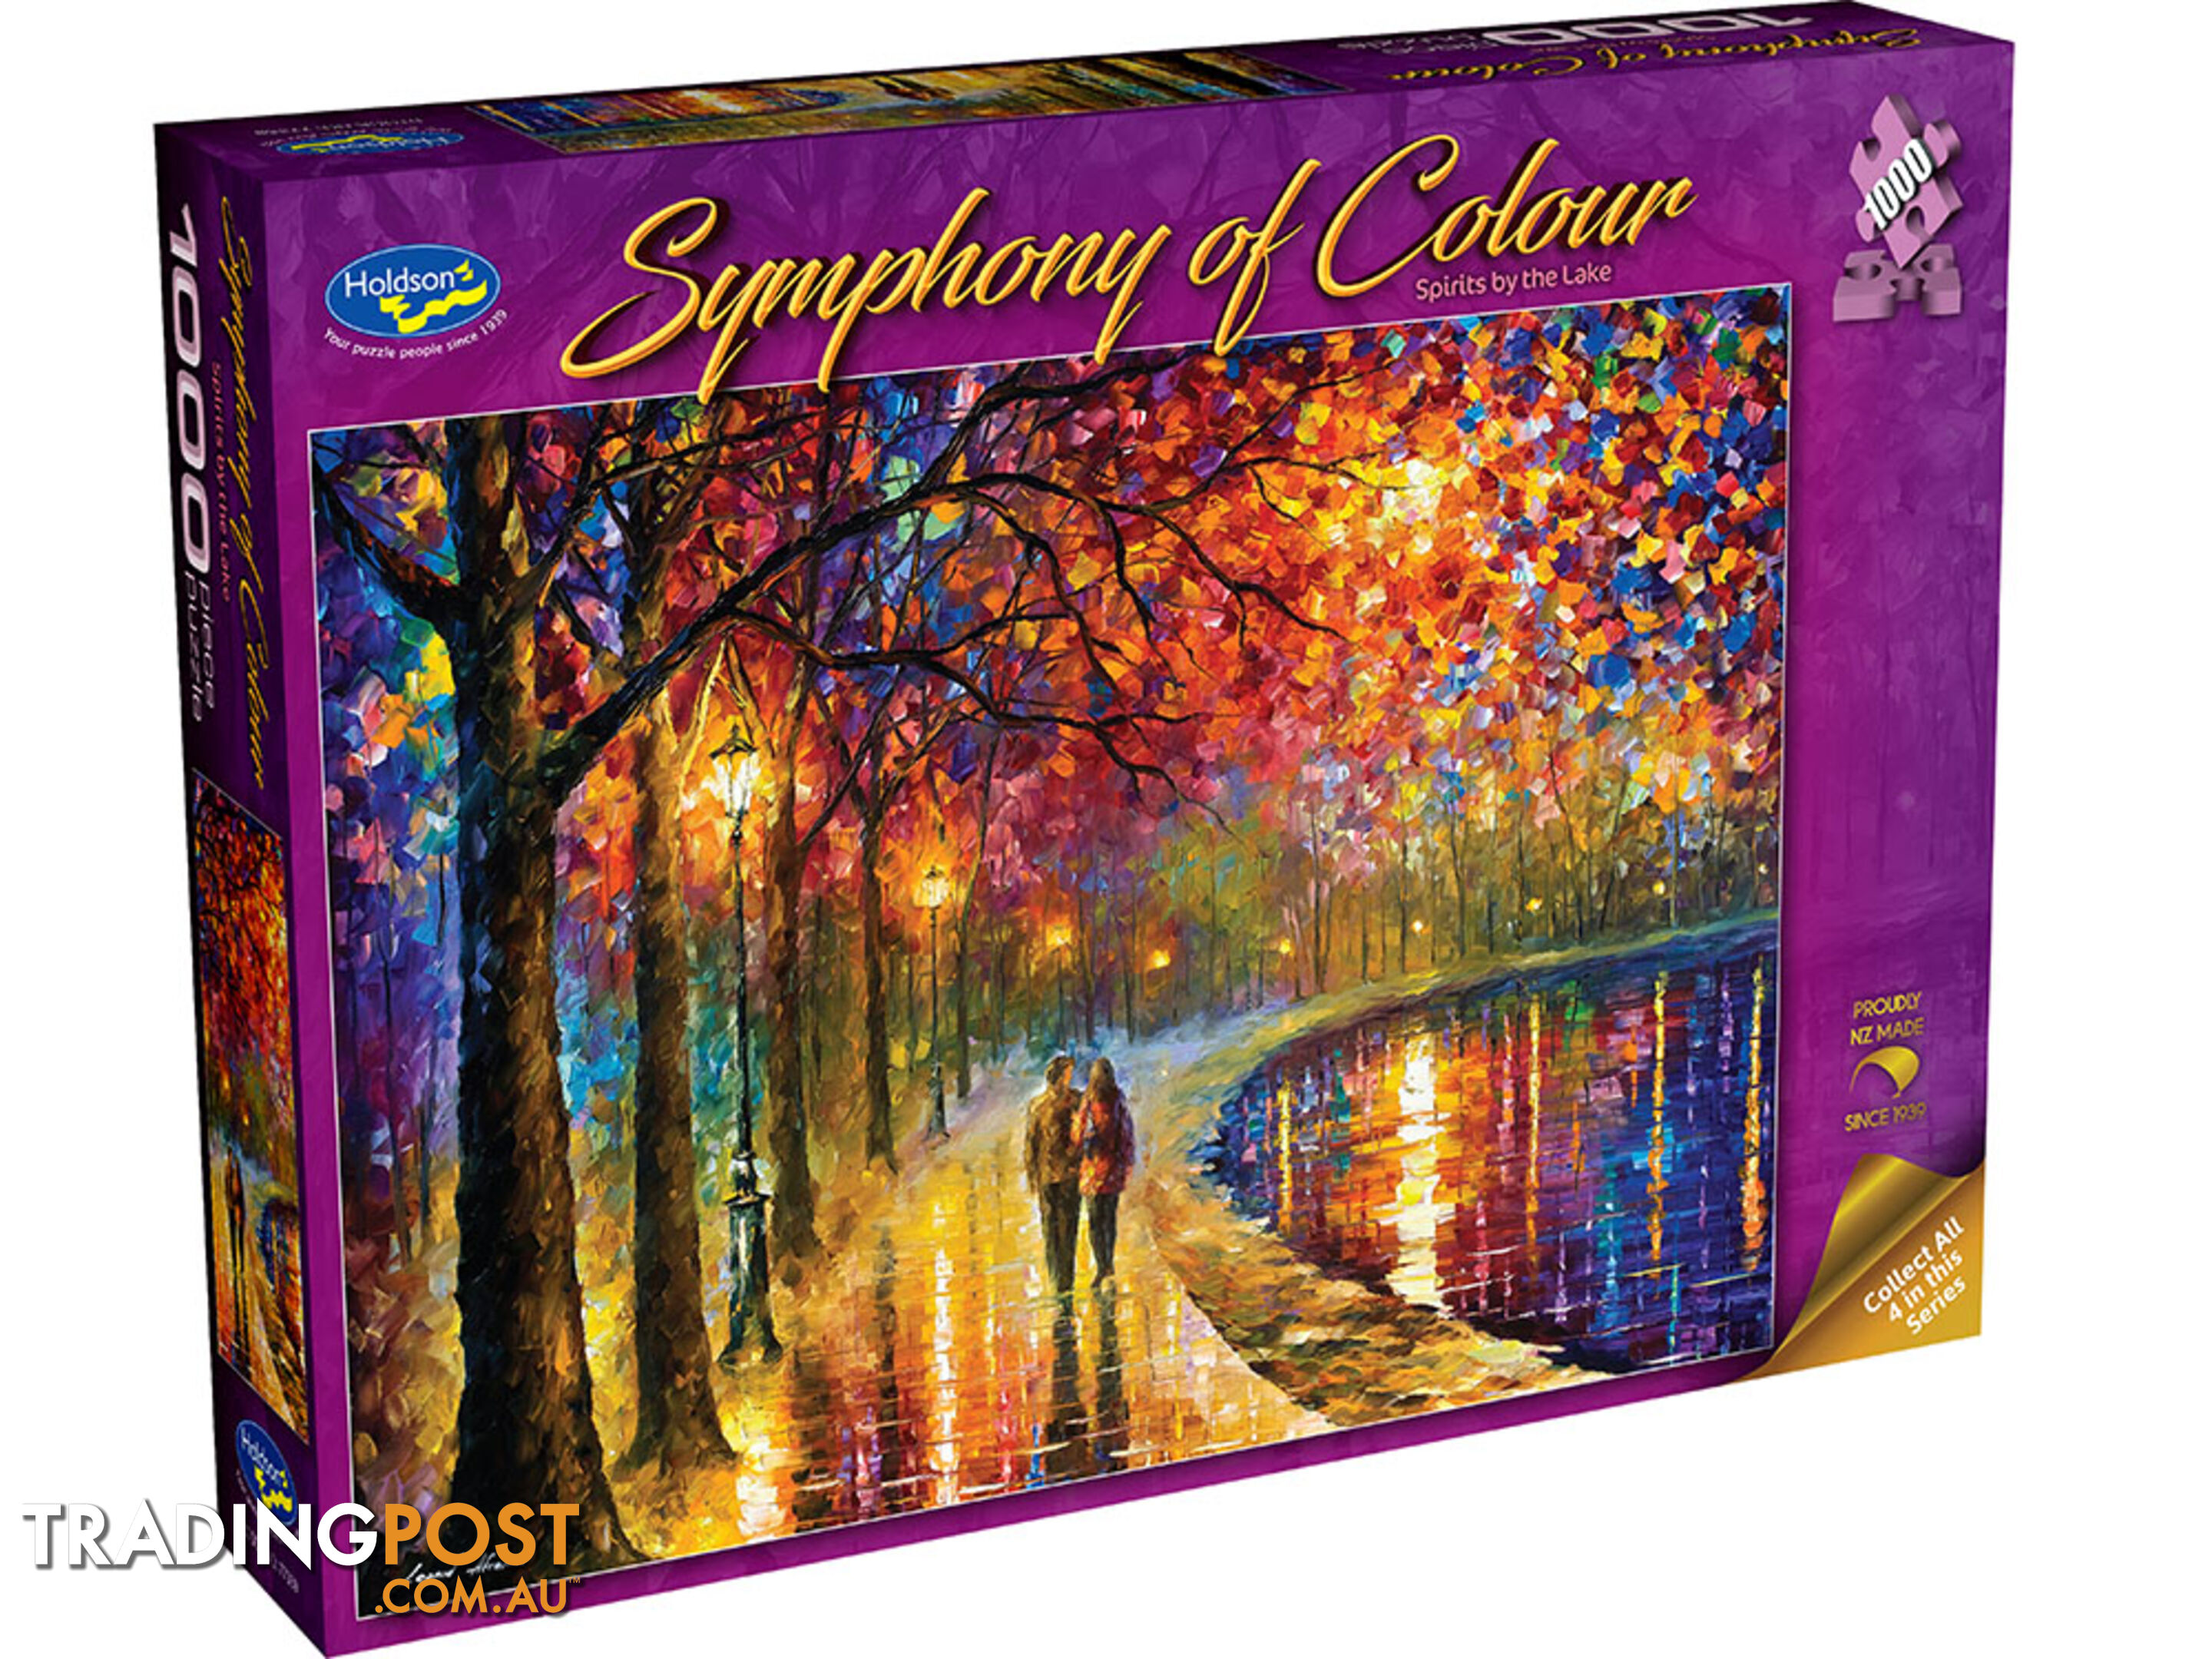 Holdson Jigsaw Puzzle - Symphony Of Colour Spirit By The Lake 1000 Piece Jigsaw Puzzle Hol773596 - 9414131773596